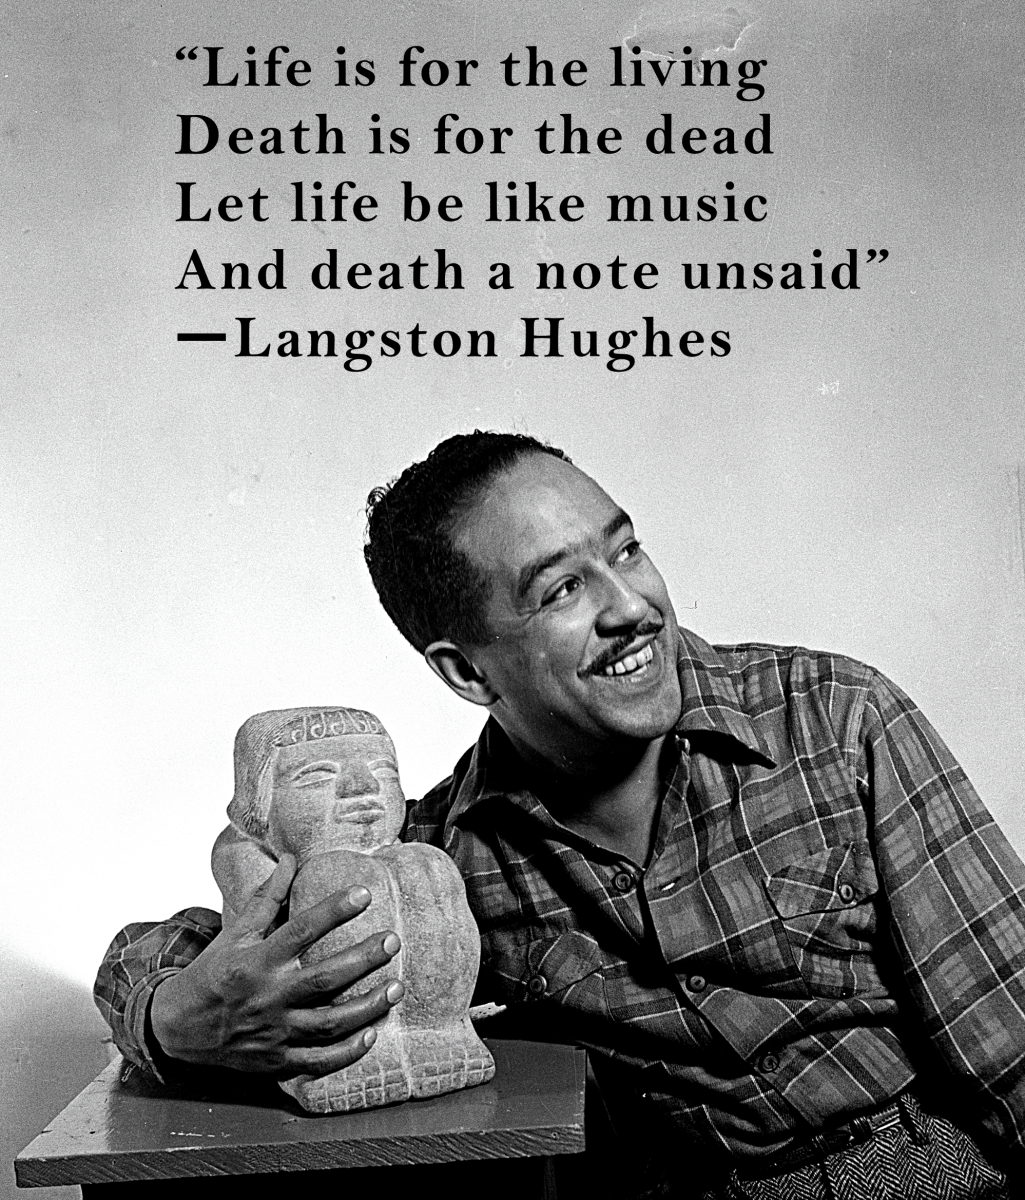 Langston Hughes on the importance of music